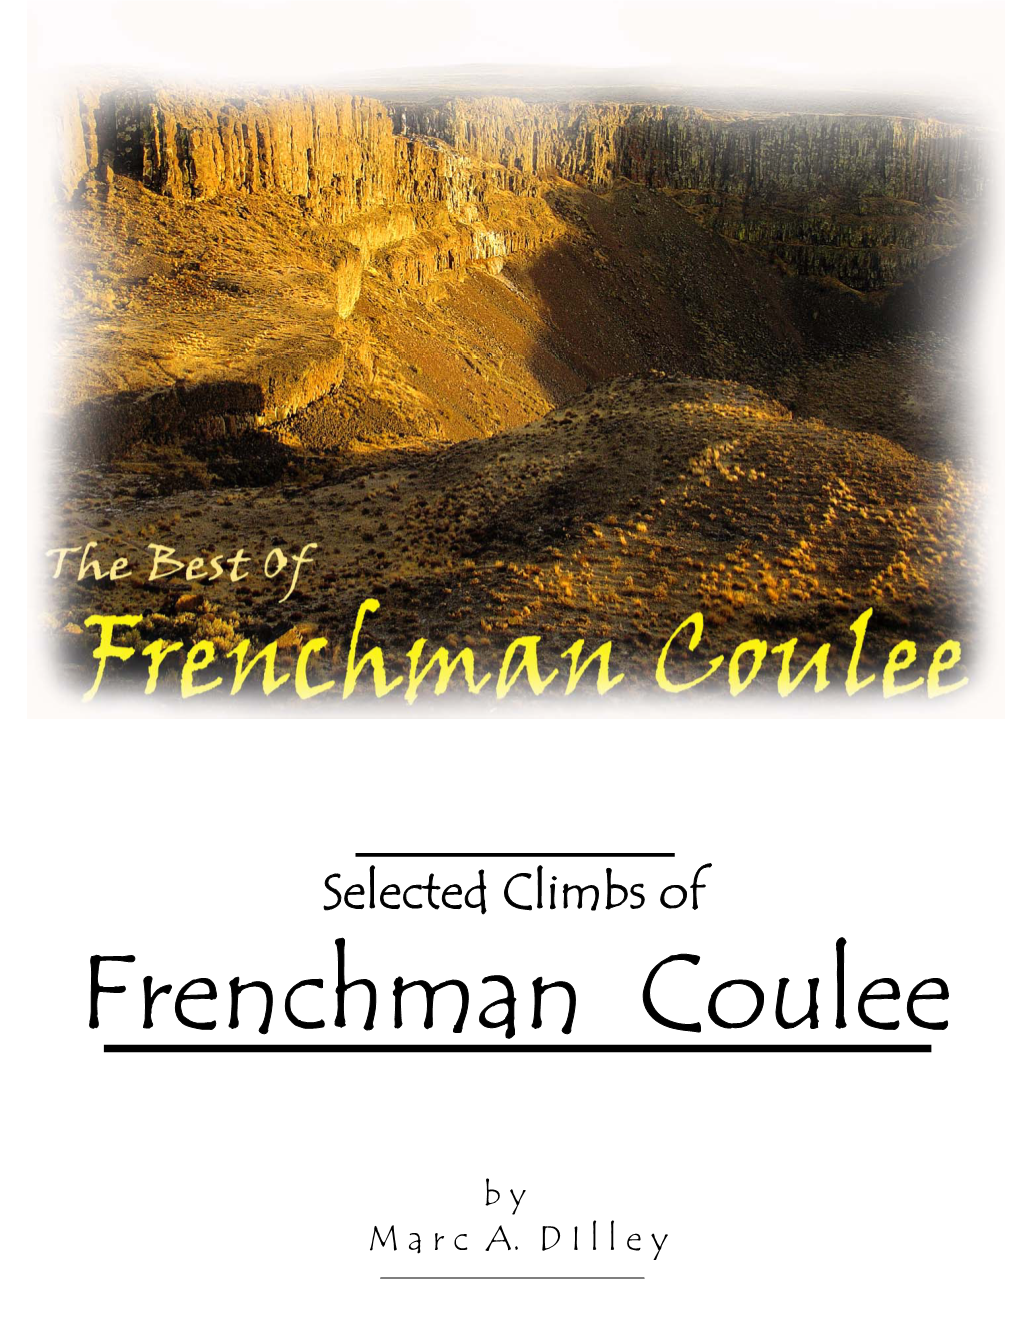 Frenchman Coulee